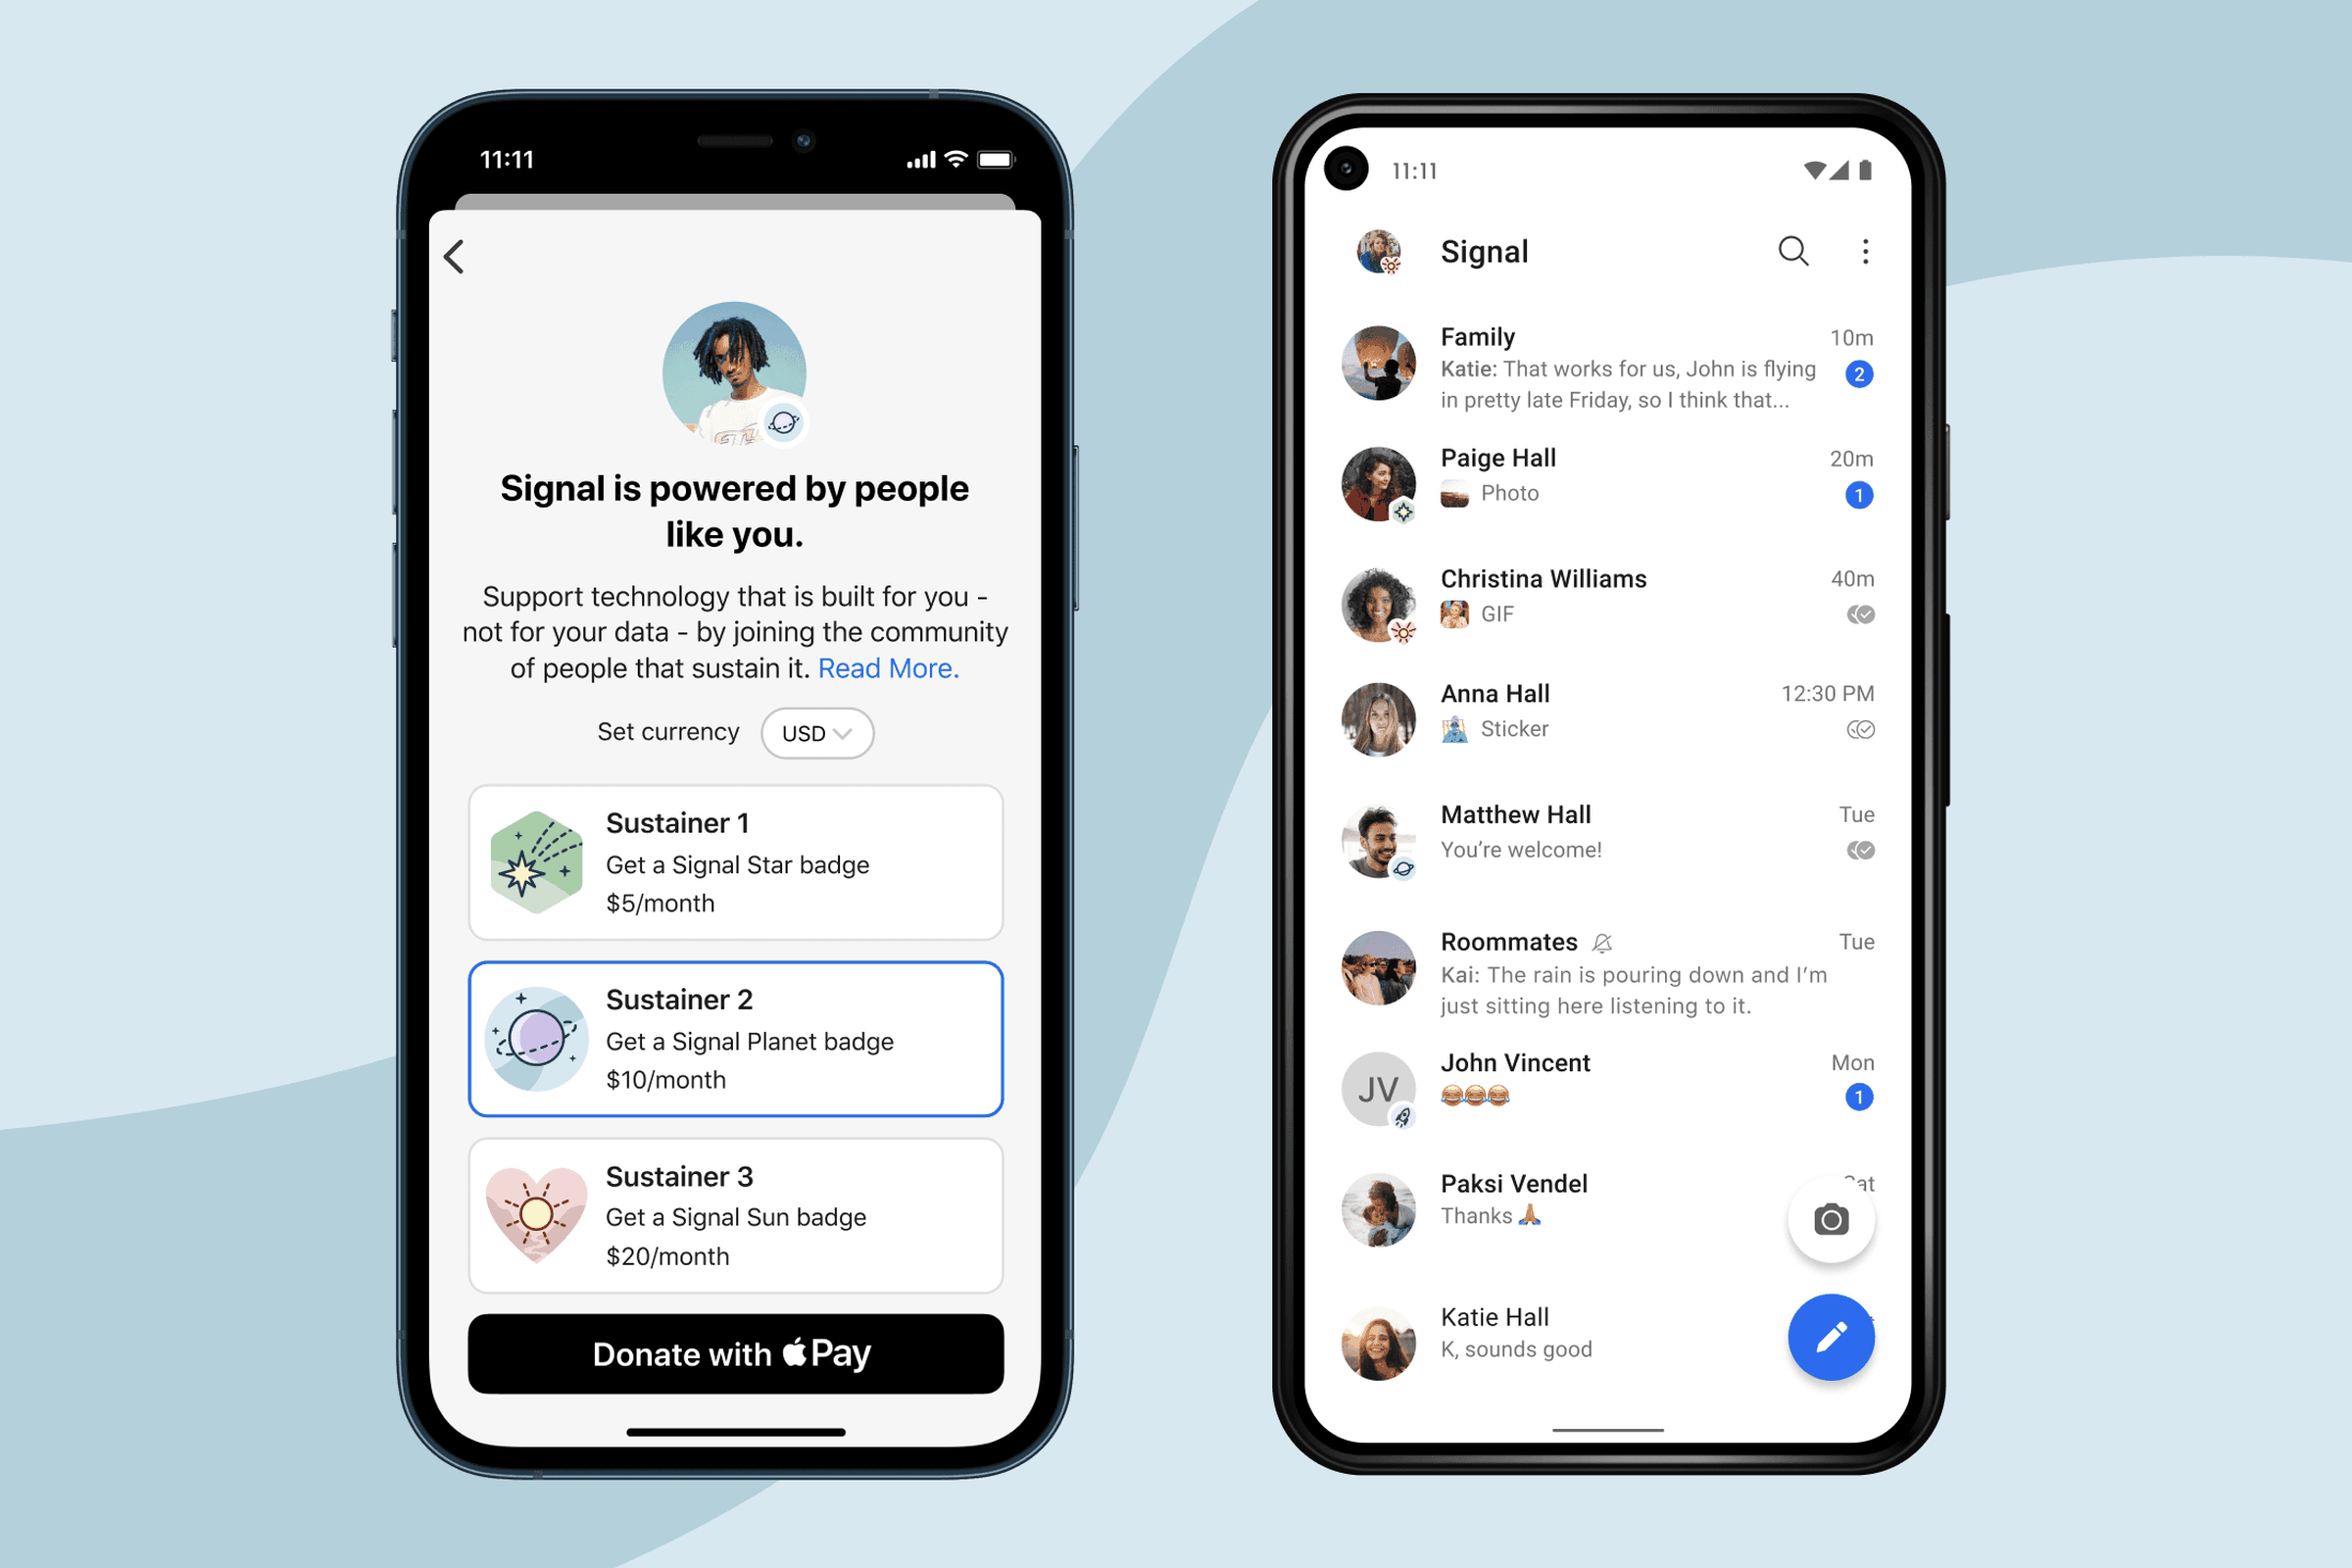 Signal users can make donations to the company within the app